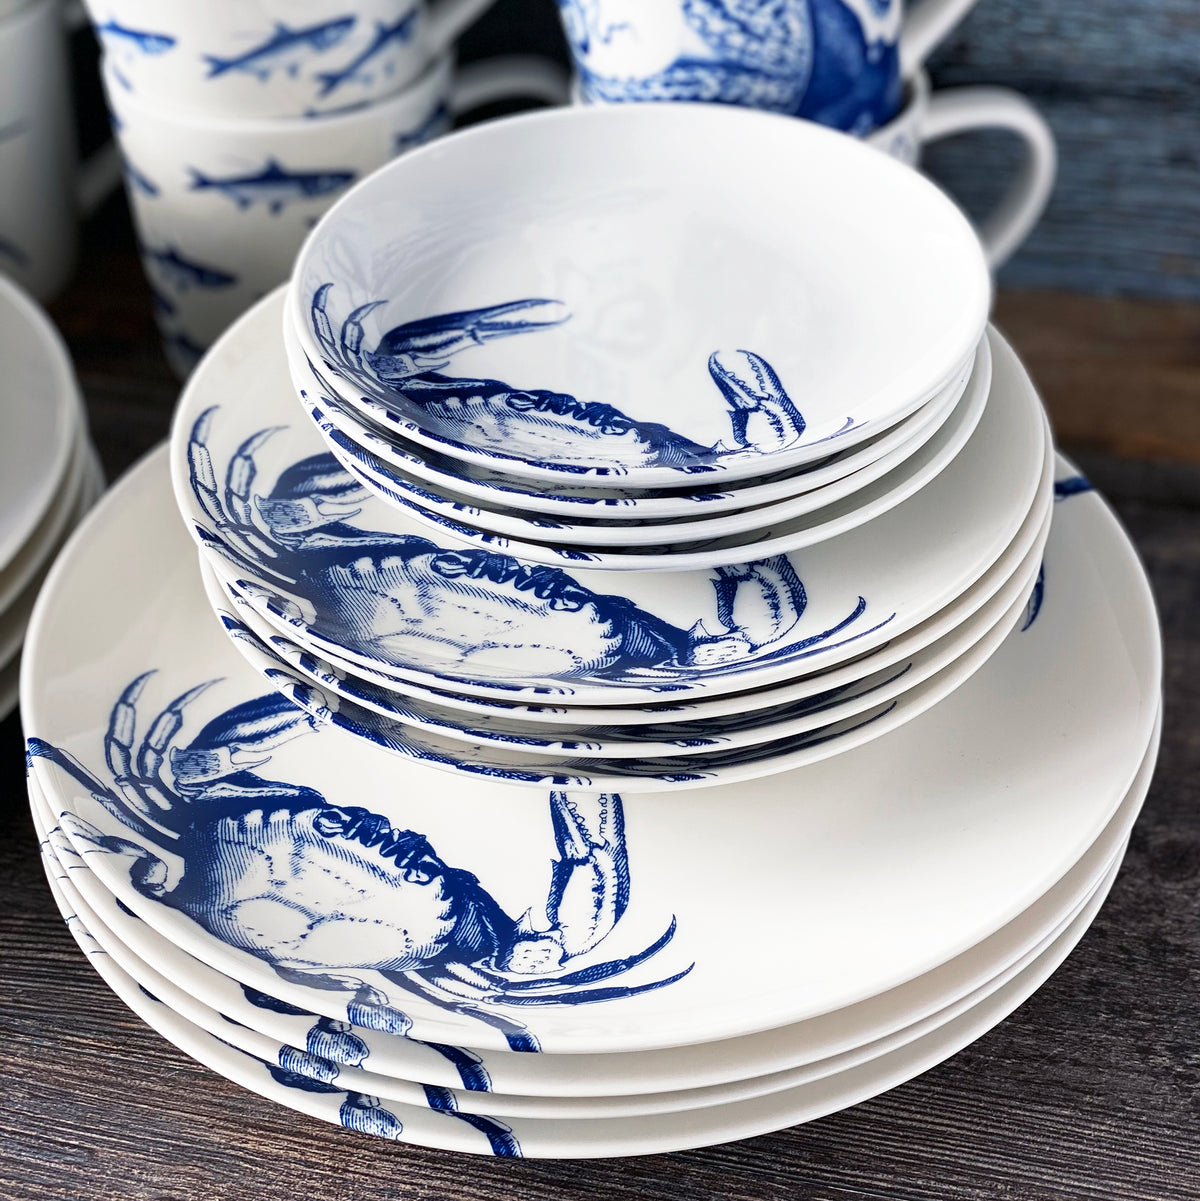 A stack of heirloom-quality dinnerware, including white ceramic bowls and Caskata Artisanal Home Crab Small Plates featuring a detailed crab pattern, is arranged on a wooden surface.